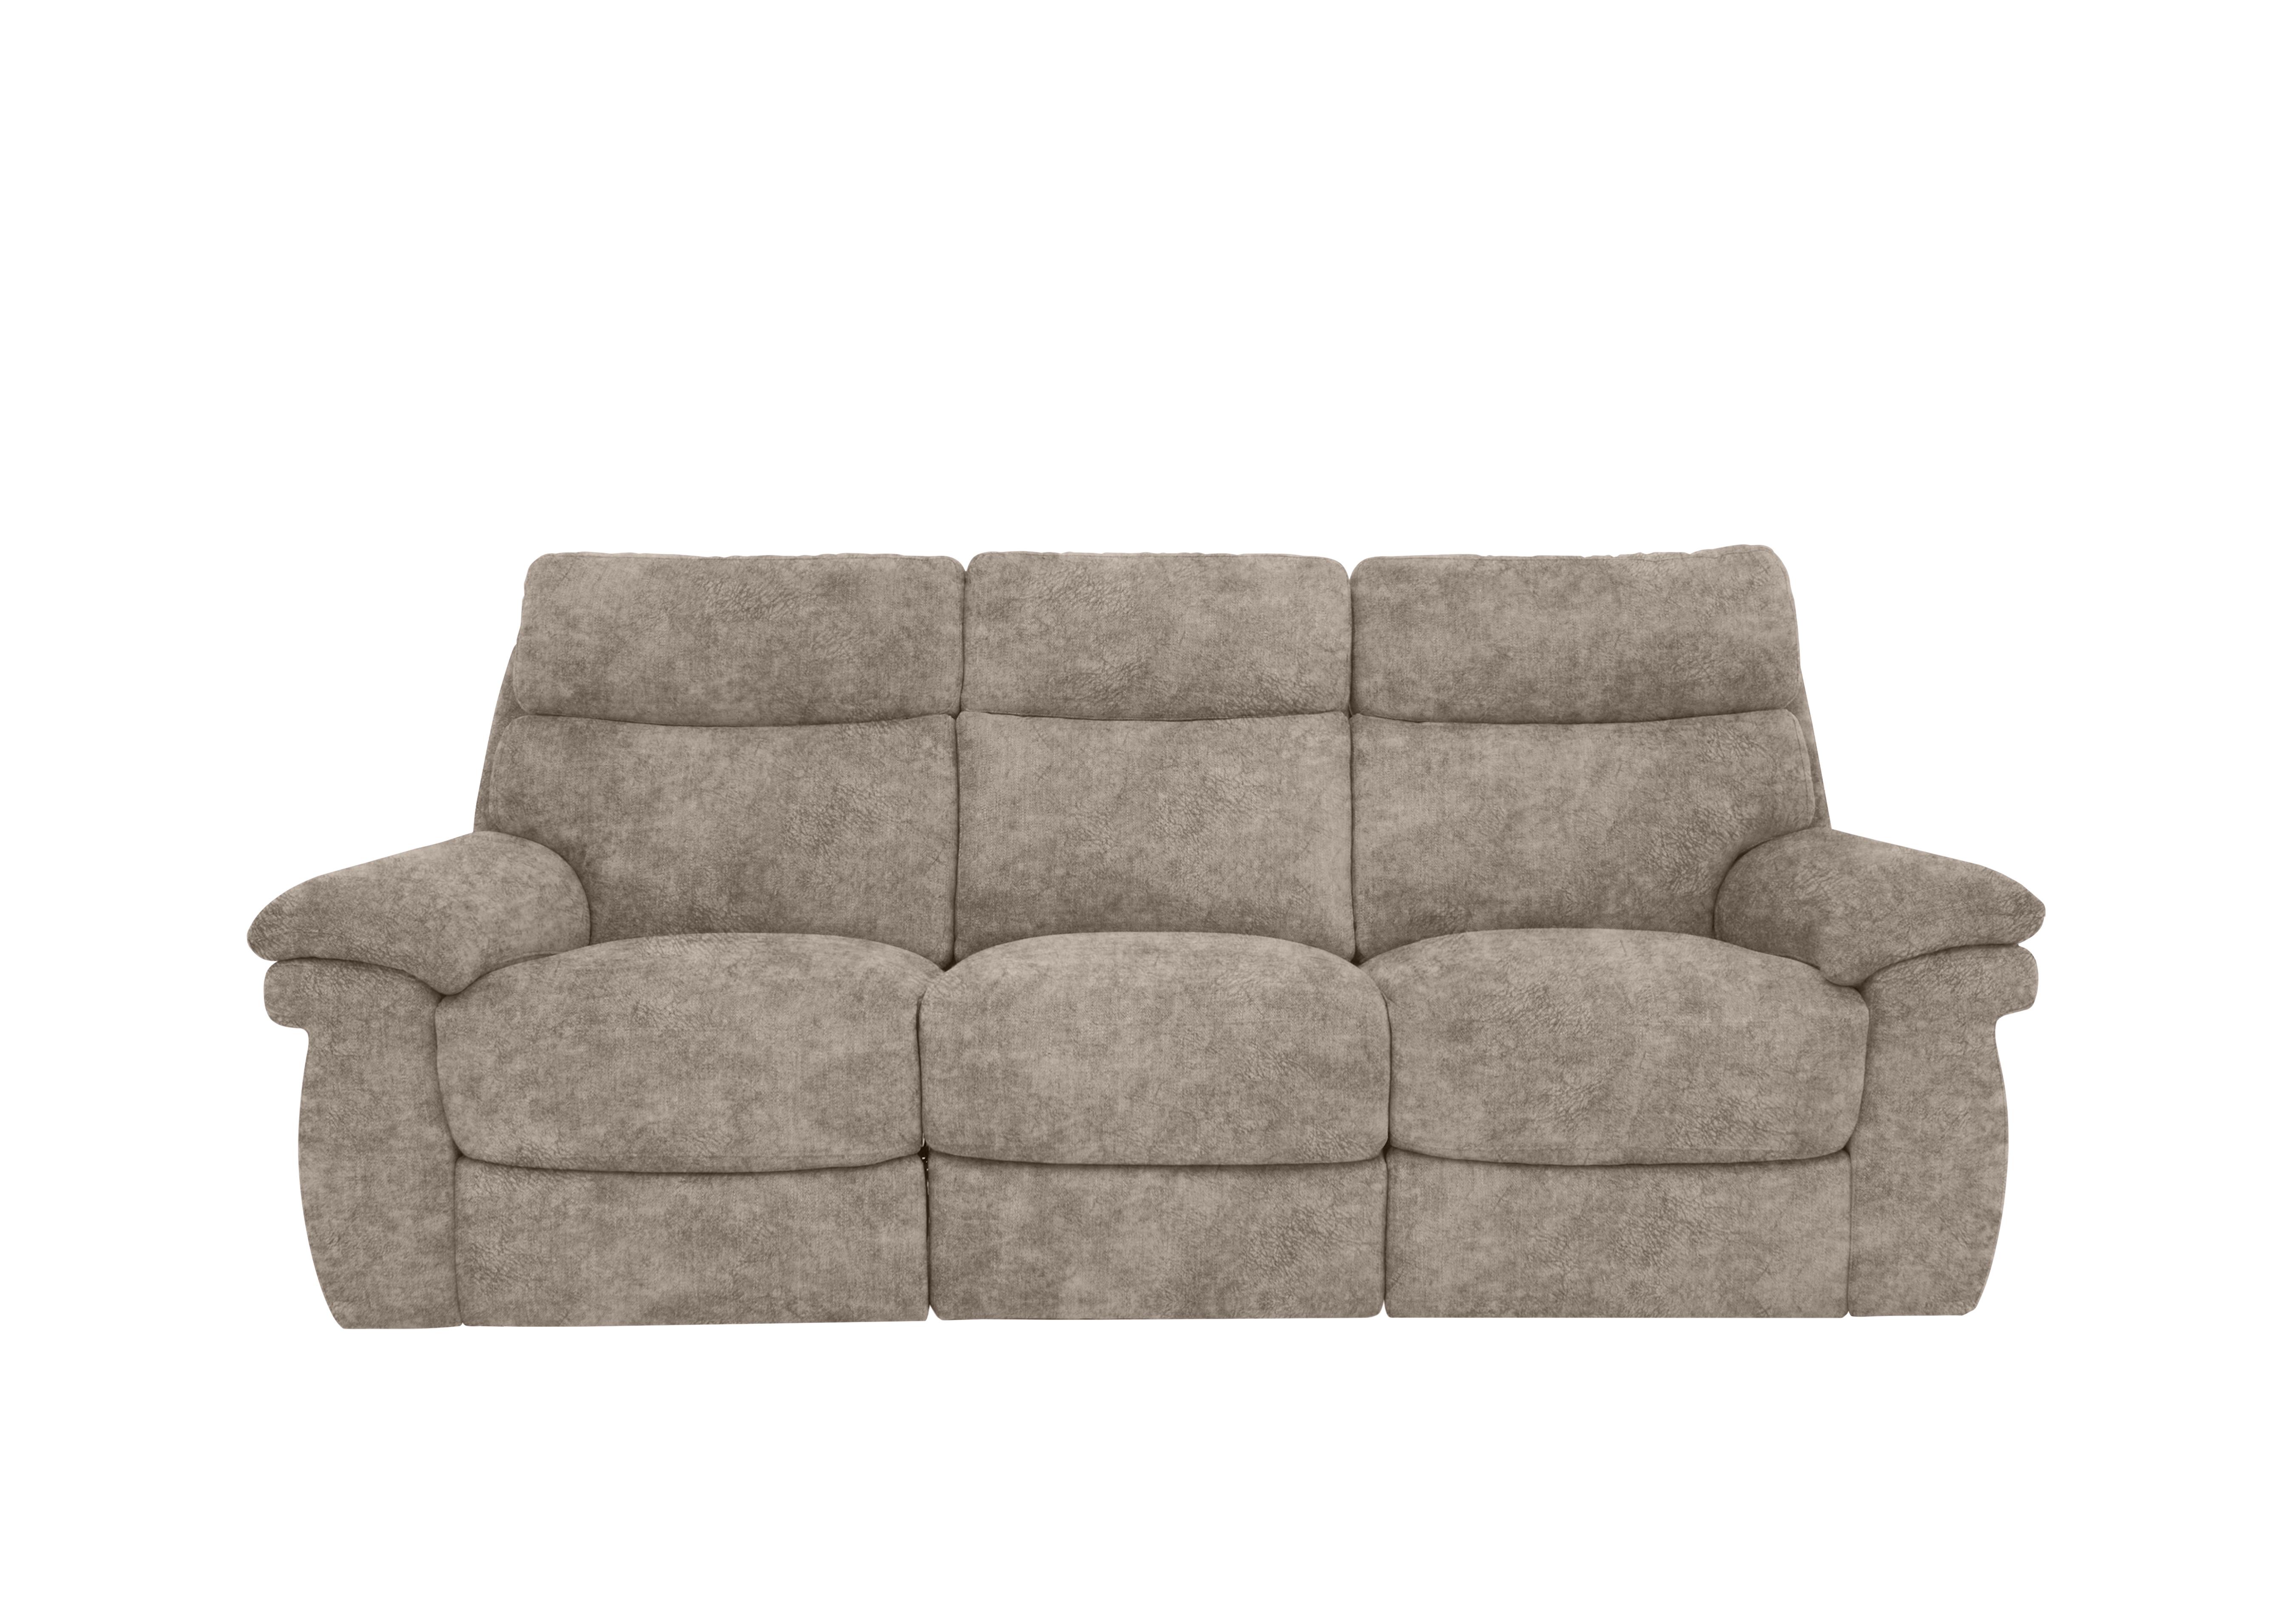 Serene 3 Seater Fabric Power Recliner Sofa with Power Headrests and Power Lumbar in Bfa-Bnn-R29 Mink on Furniture Village